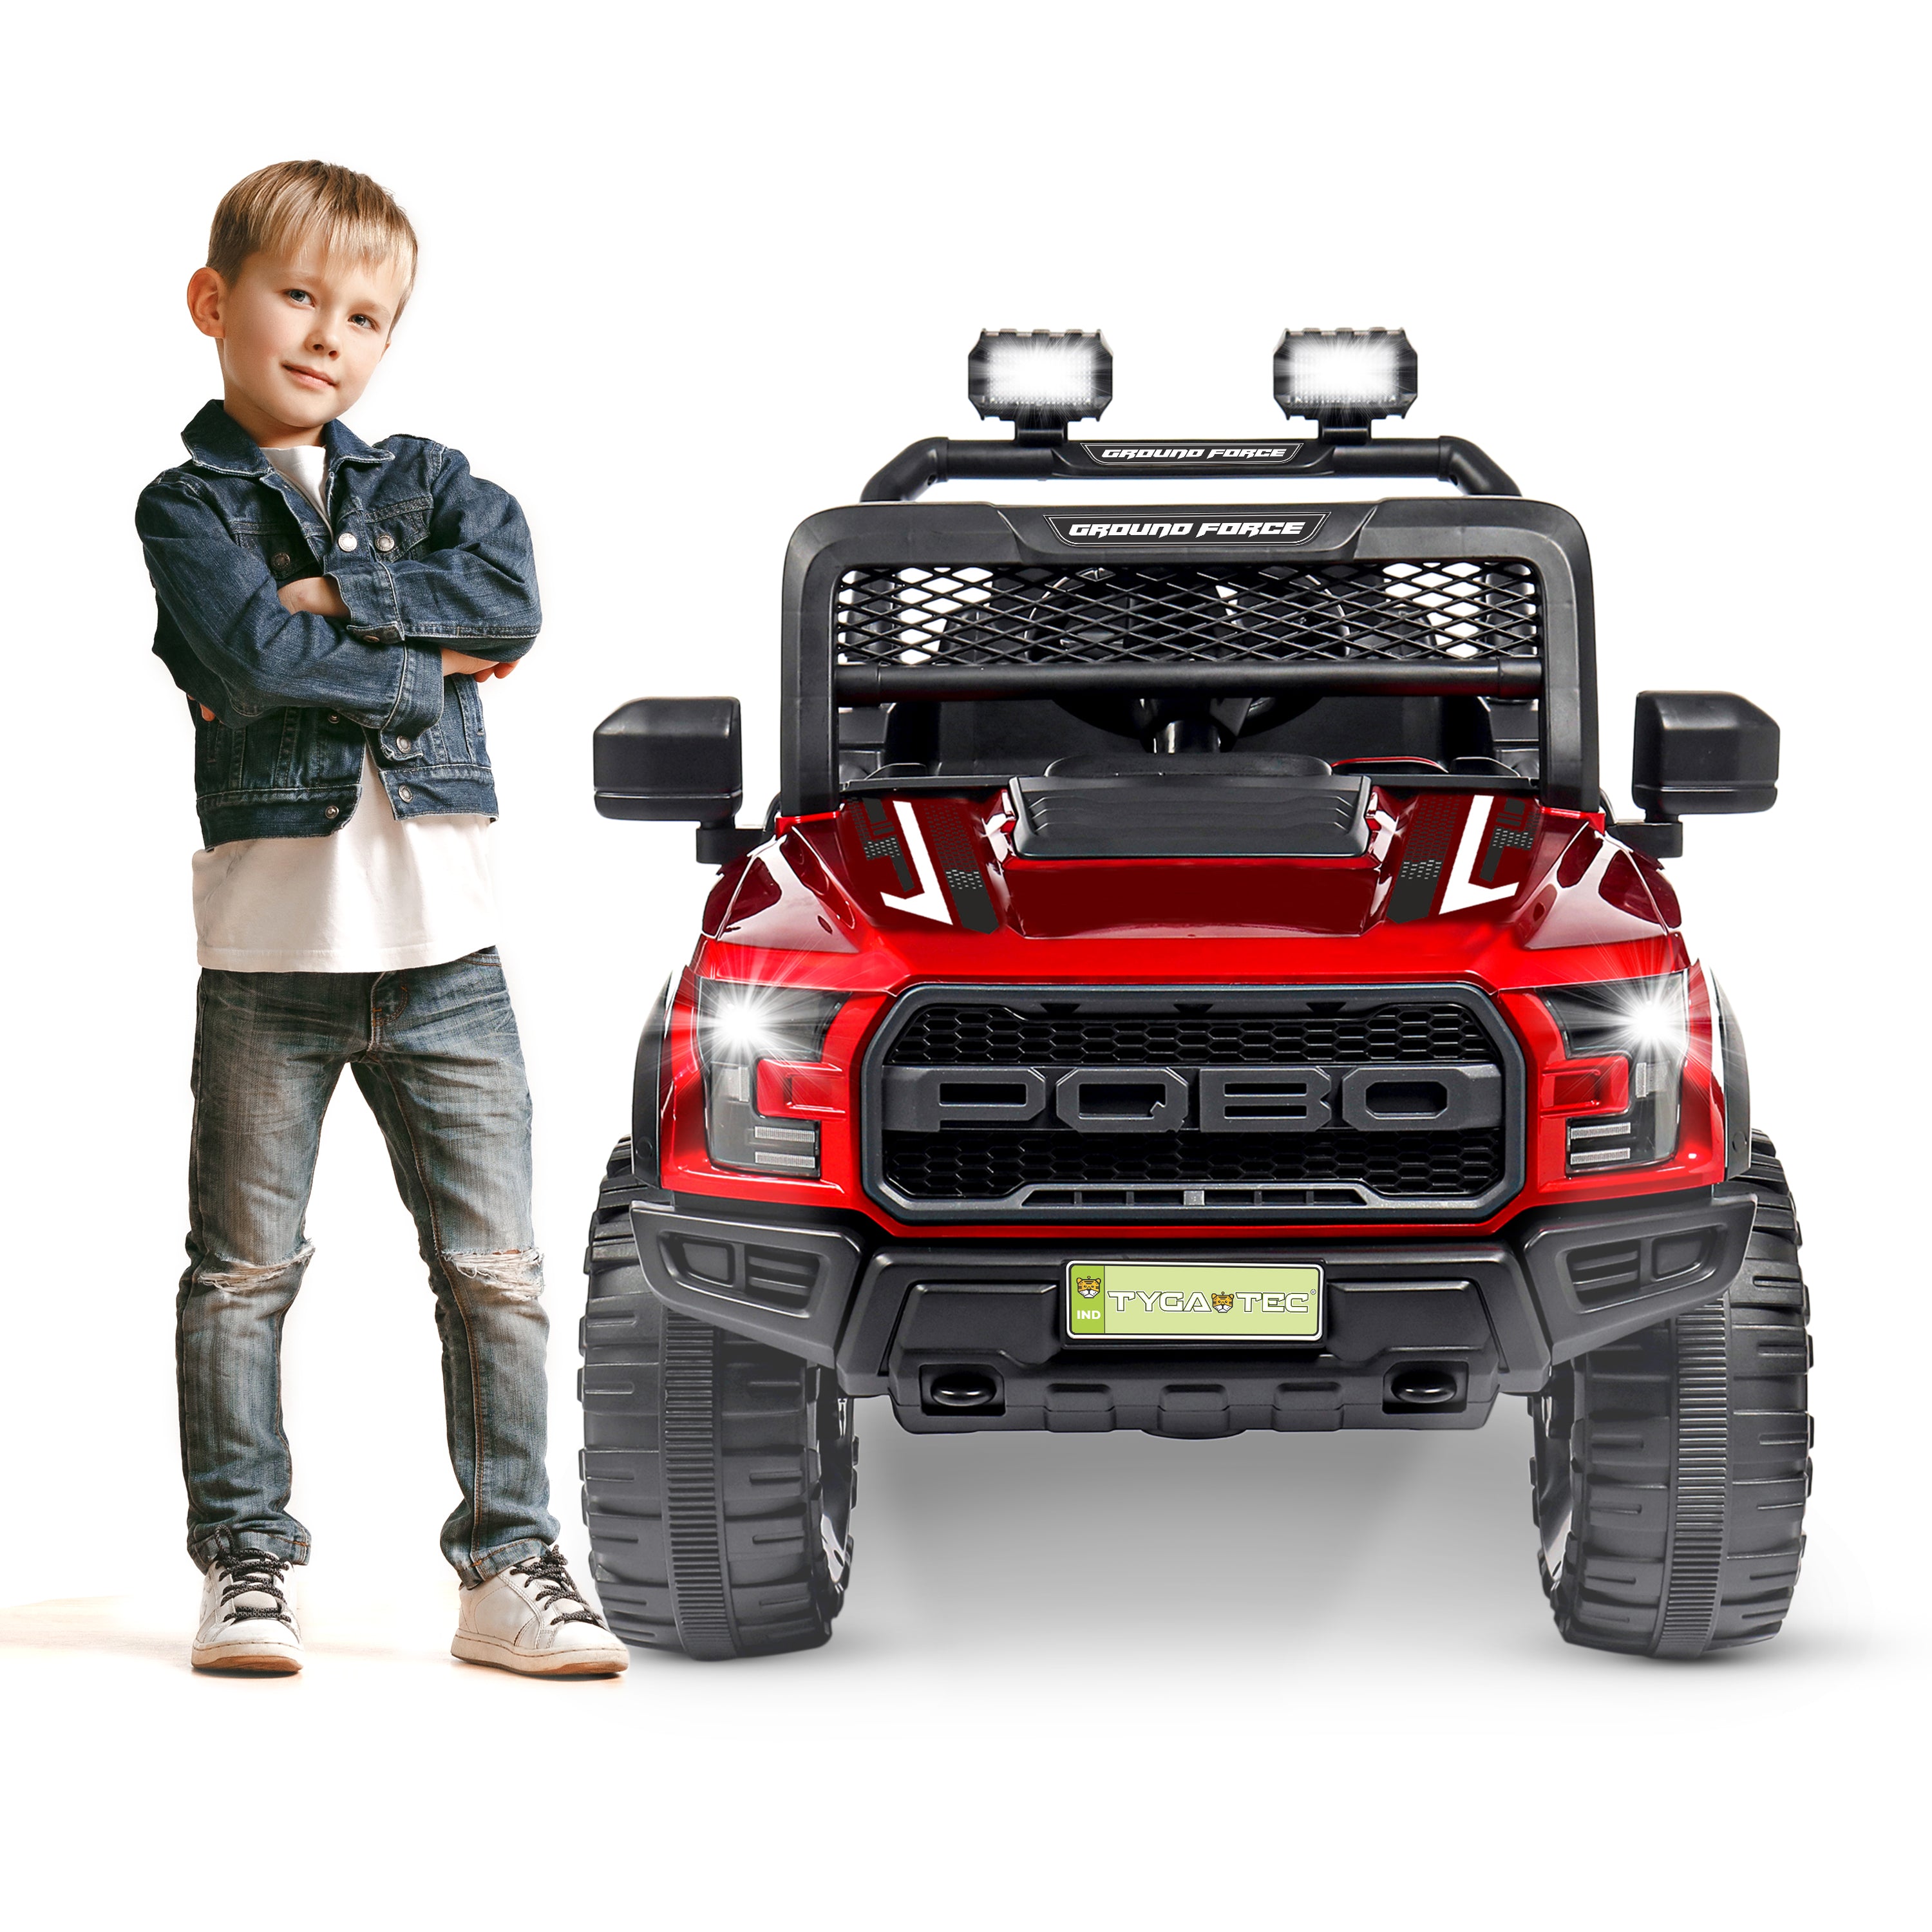 Tygatec Ride-on Kids Car Ground Force EXPLORER  (RED COLOUR)